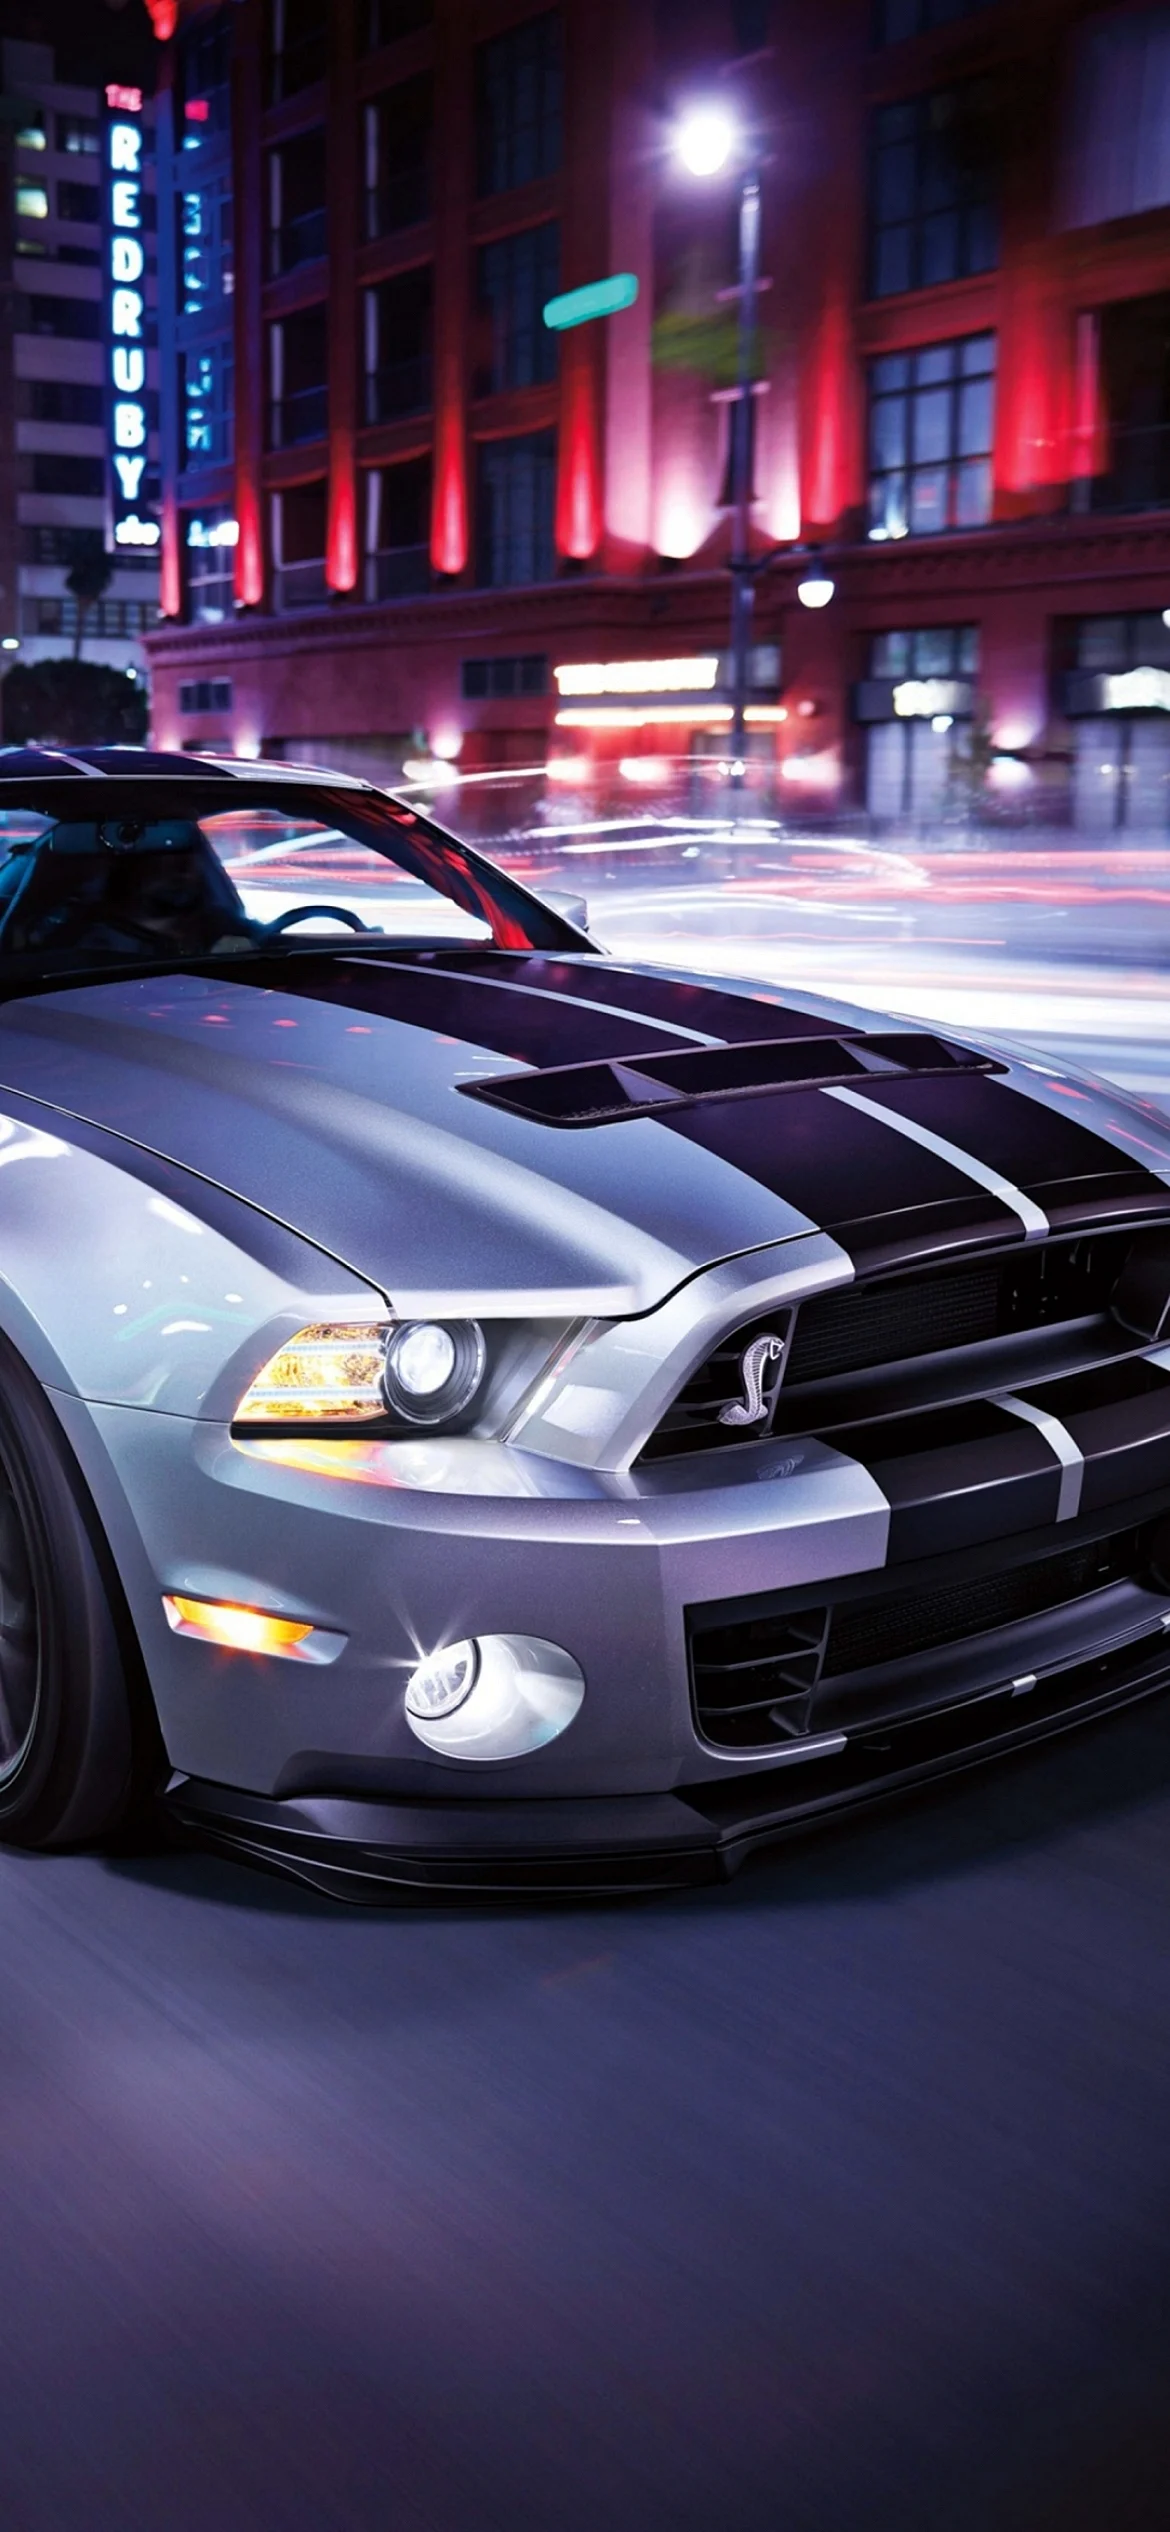 Ford Shelby Gt500 Wallpaper for iPhone 13 Pro